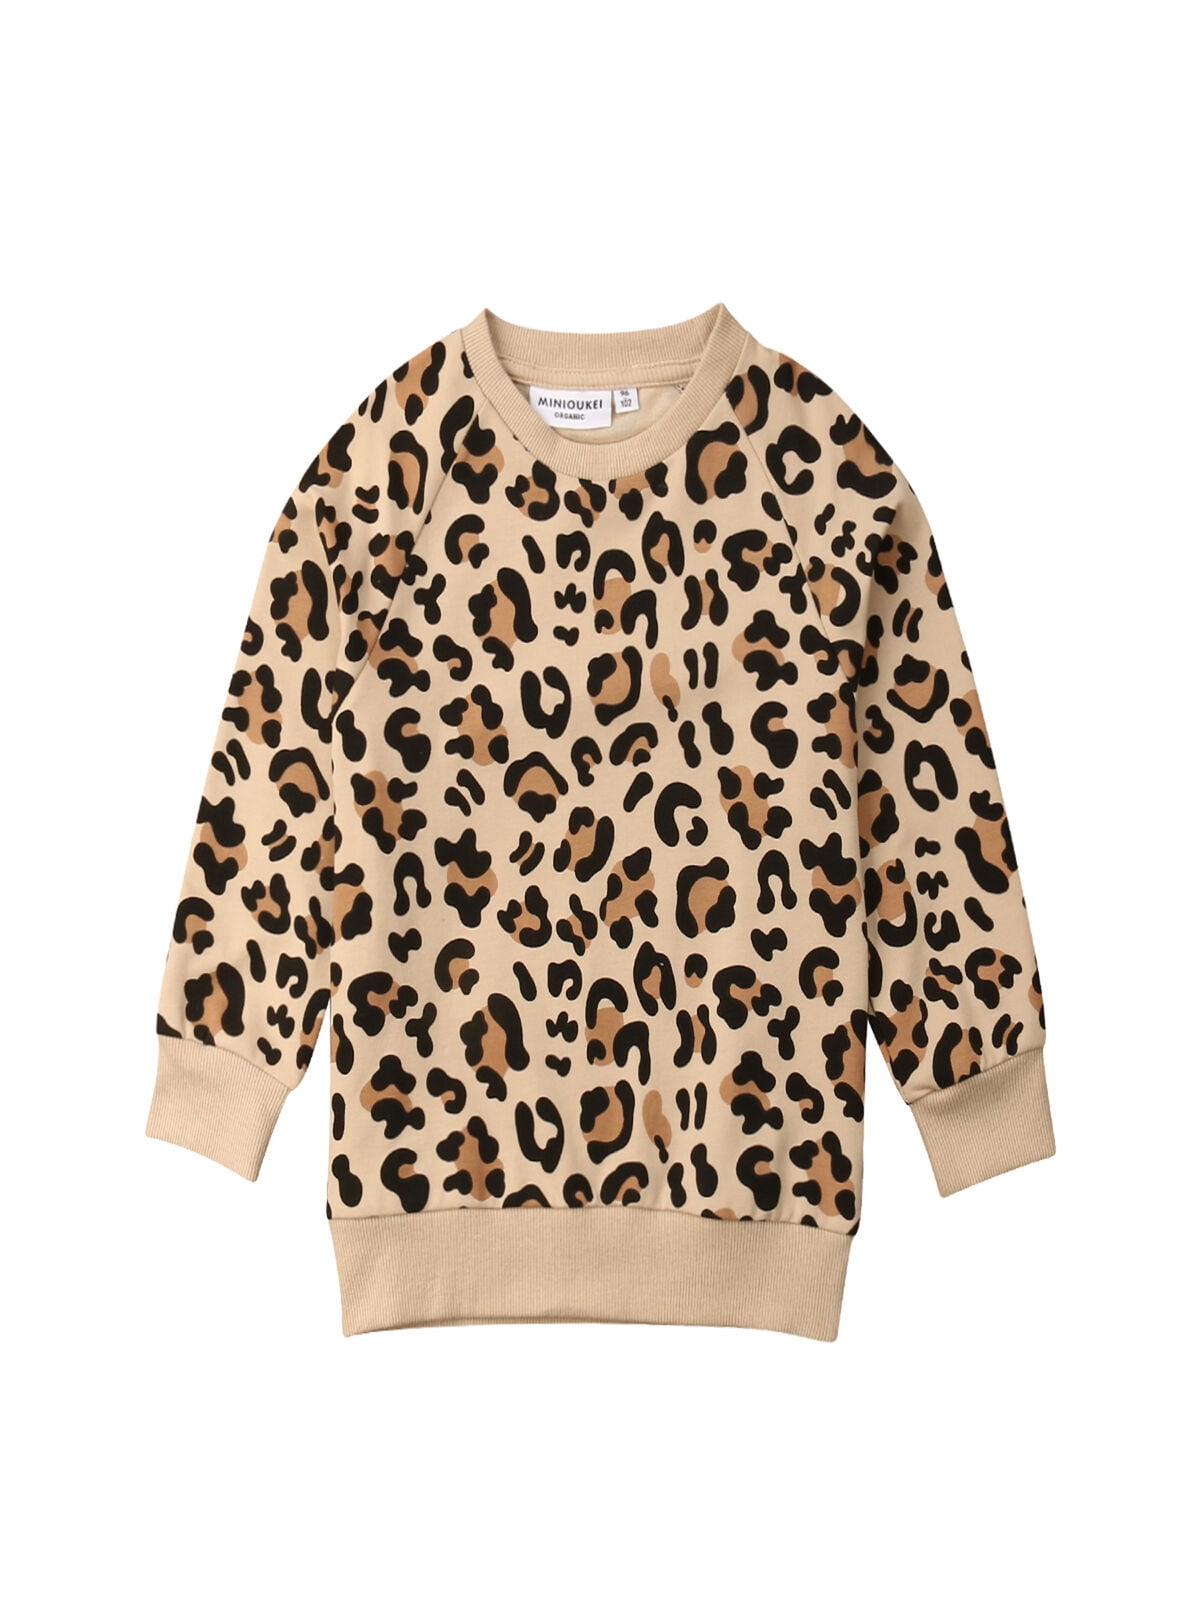 Infant Toddler Baby Boys Girls Leopard Sweater Shirt Long Sleeve Cheetah Cardigan Pullover Top Fall Winter Clothes 